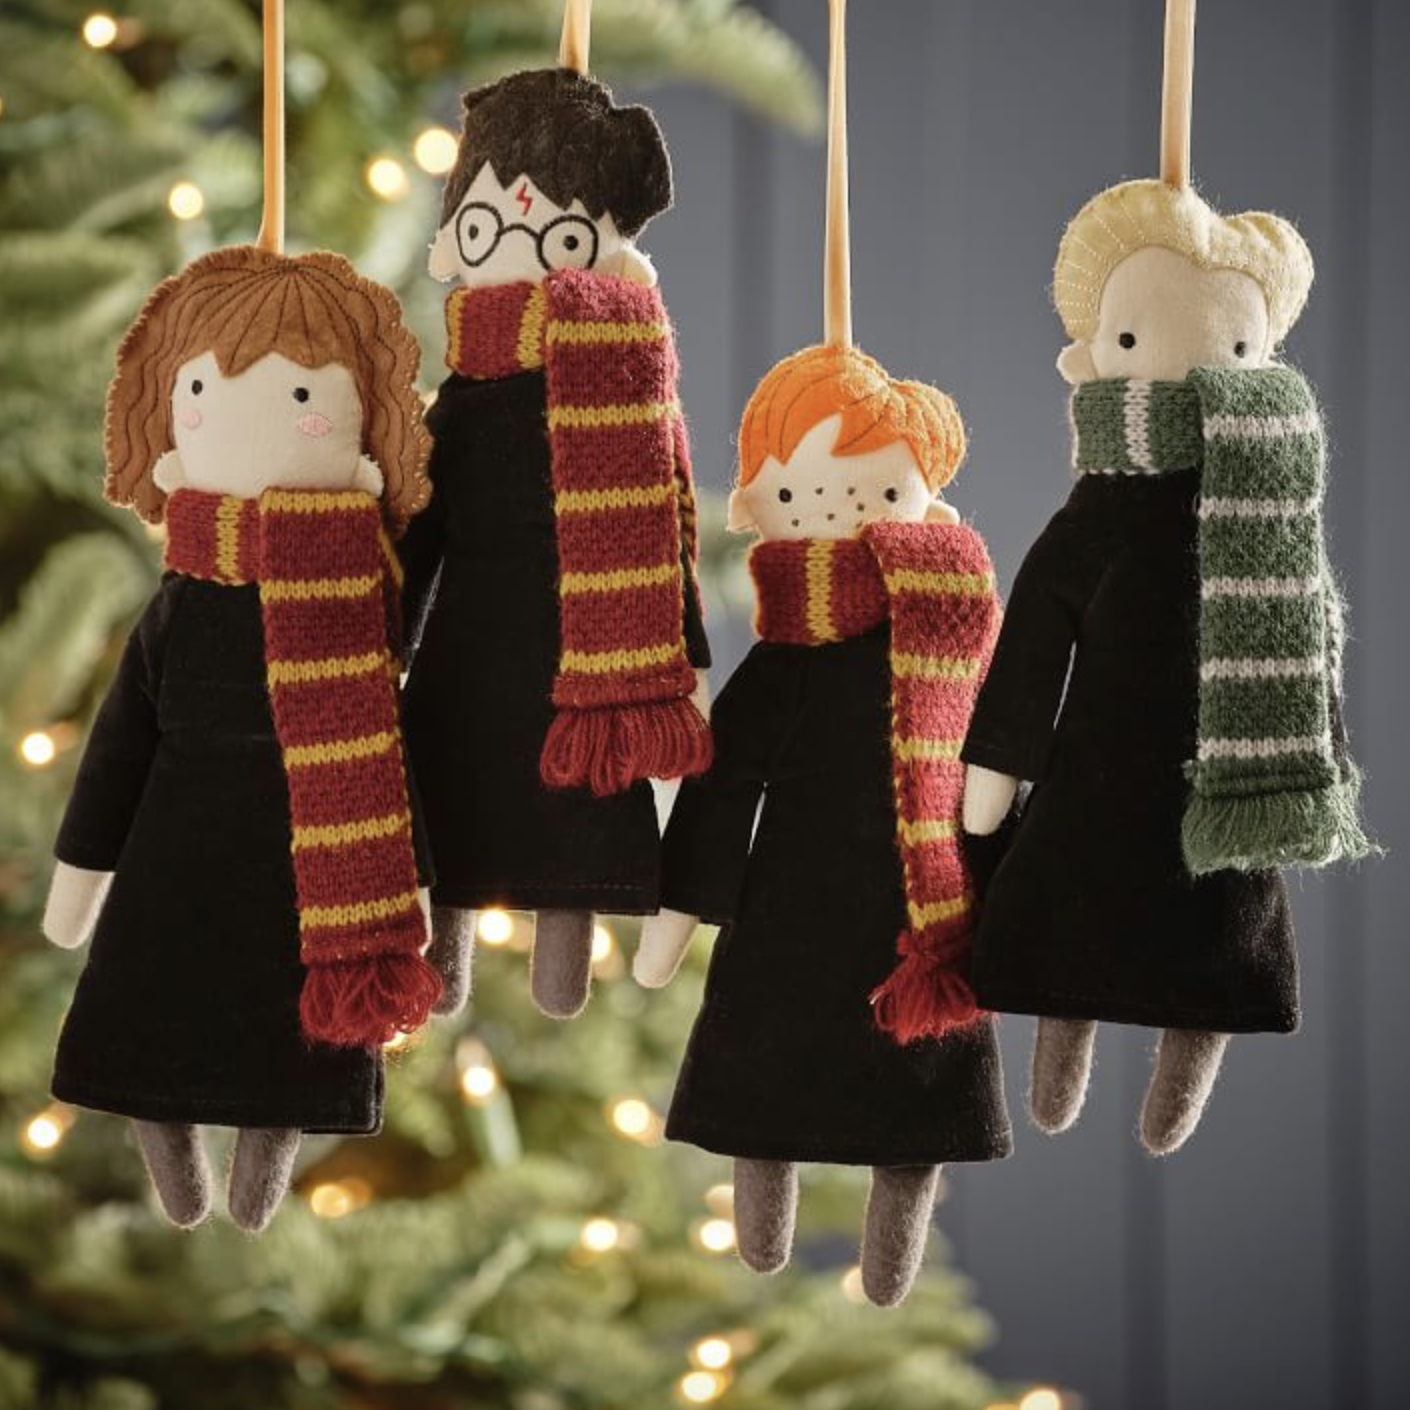 A Magical Harry Potter Christmas Party with Pottery Barn Kids